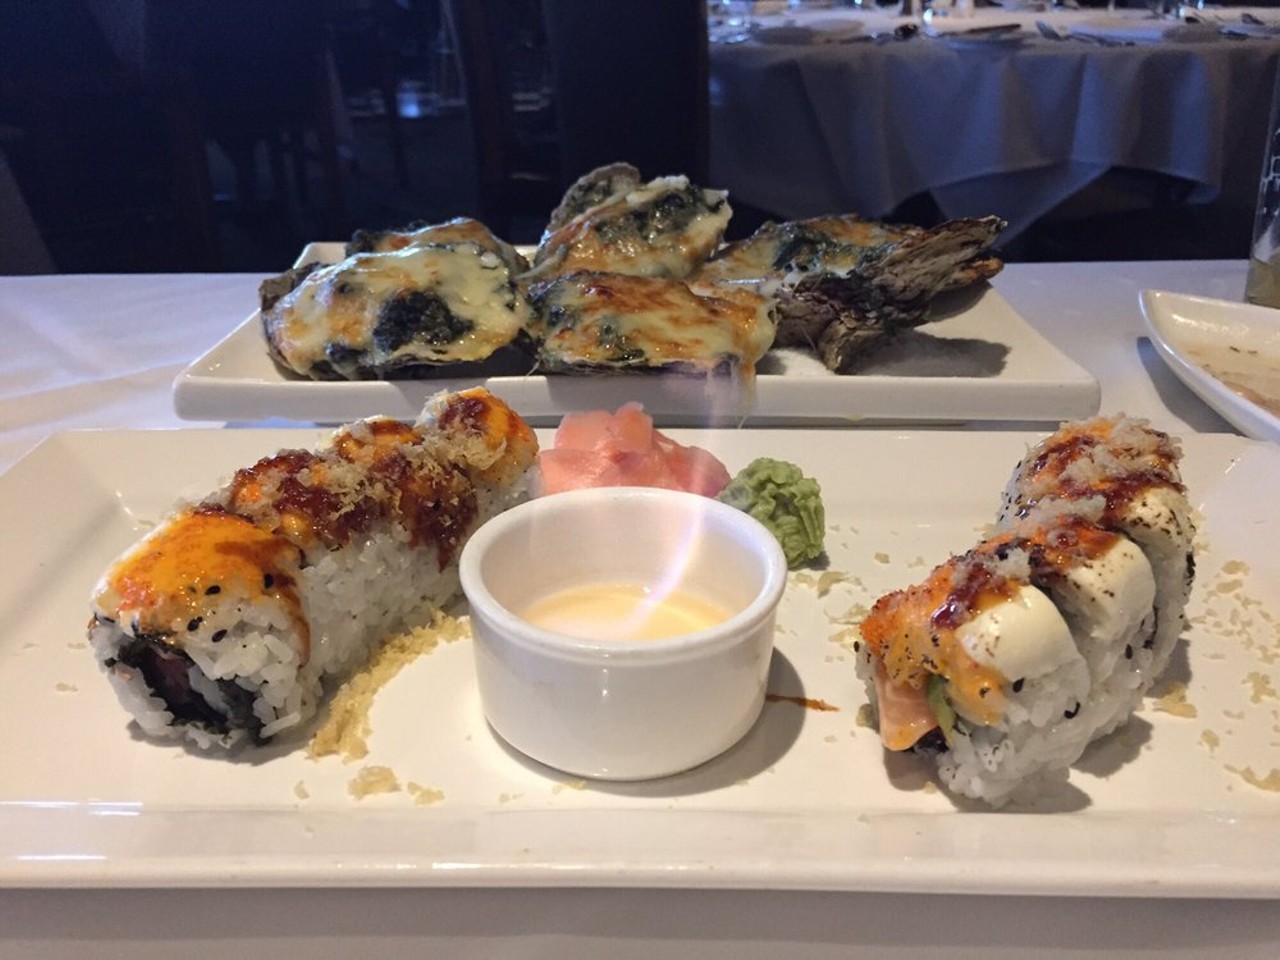 Joe Muer Seafood - 400 Renaissance Center, Ste. 1404, Specialists in seafood, sushi, and access to fantastic river views (photo by Laurie P./Yelp).